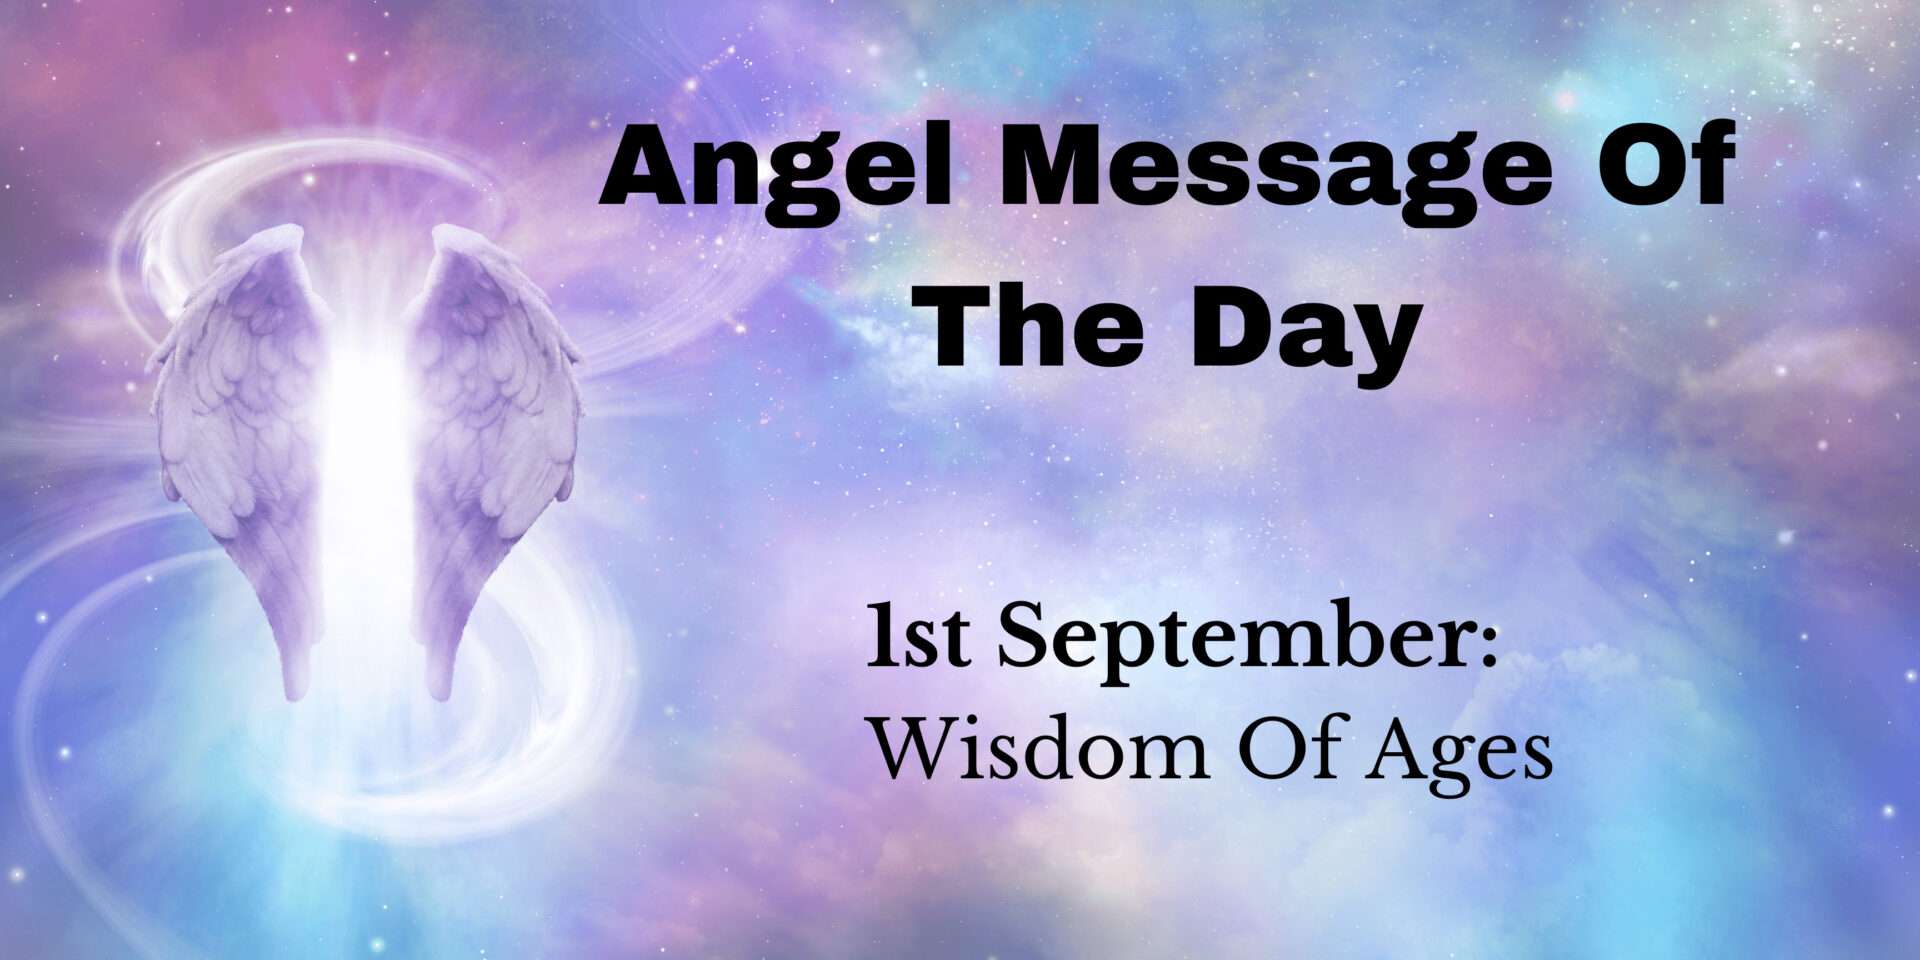 angel message of the day : wisdom of ages